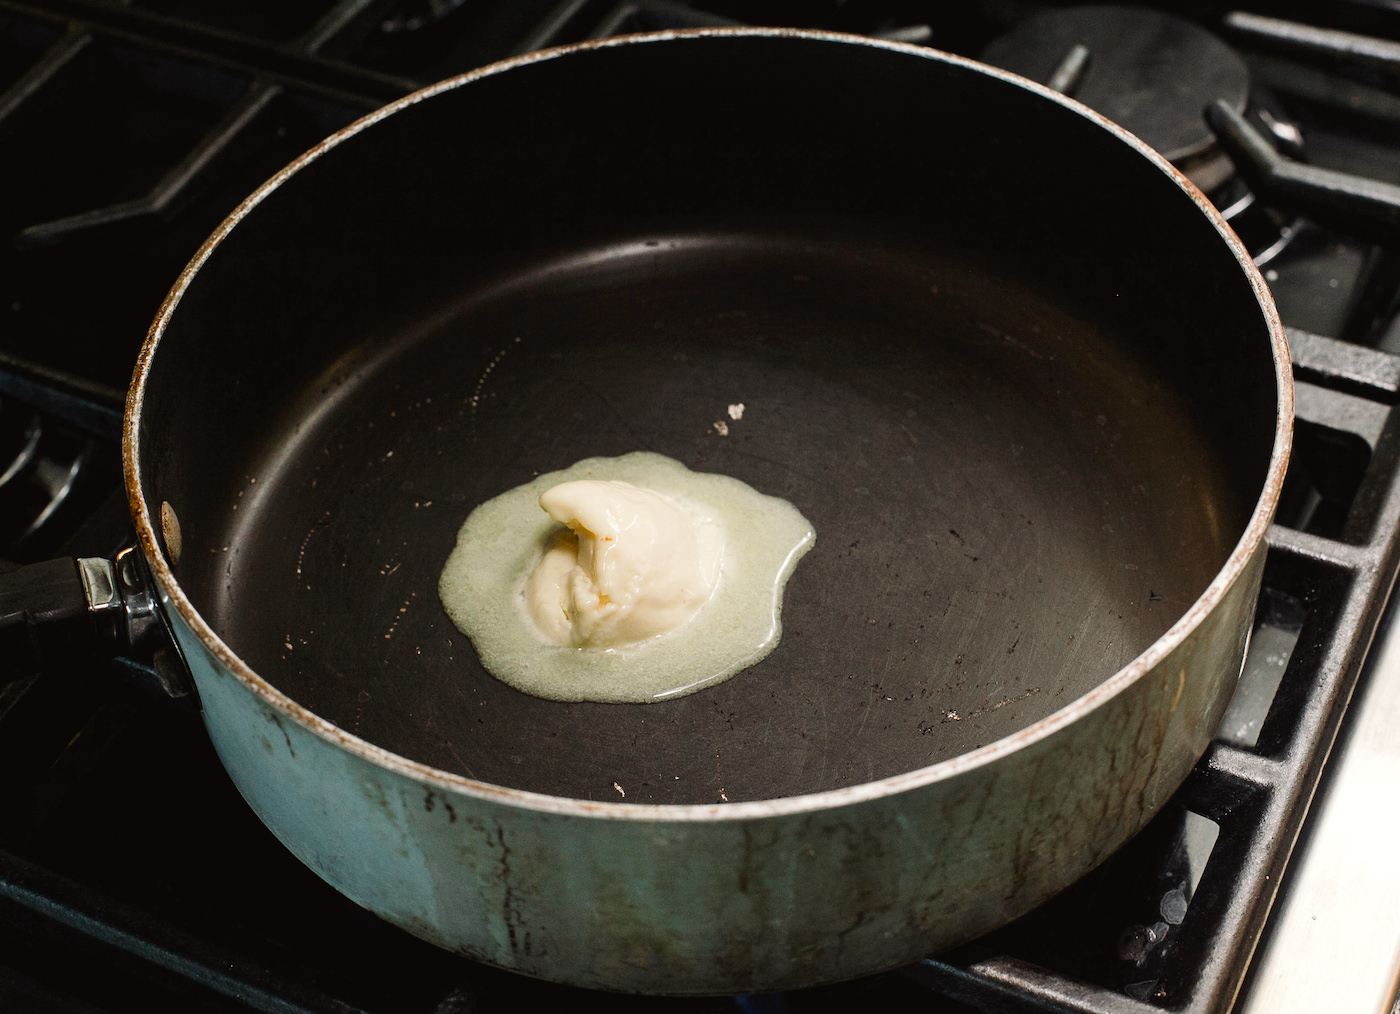 melting butter in a skillet on the stove